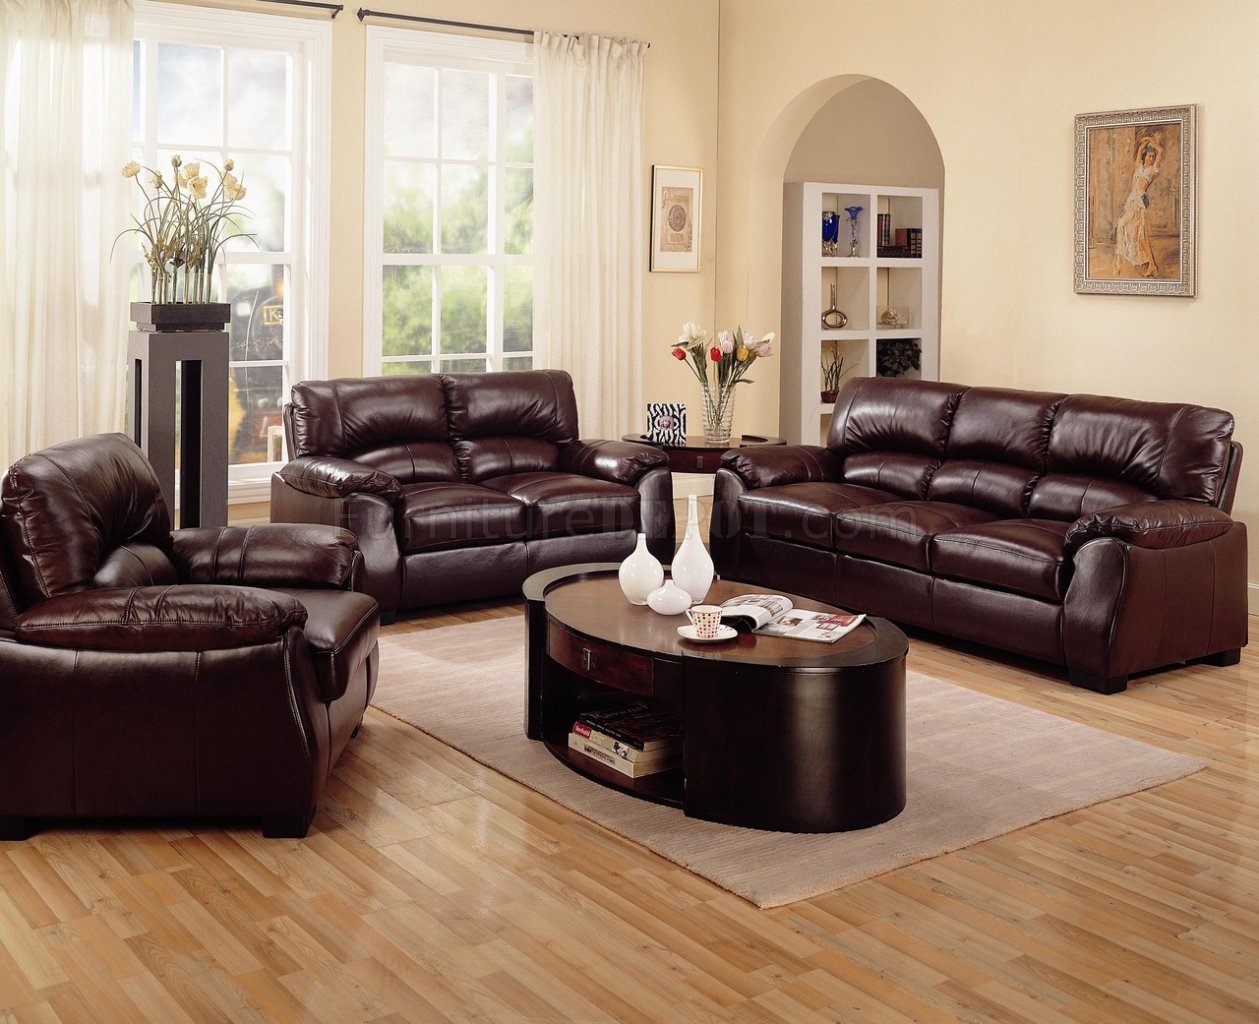 leather sofas in living room